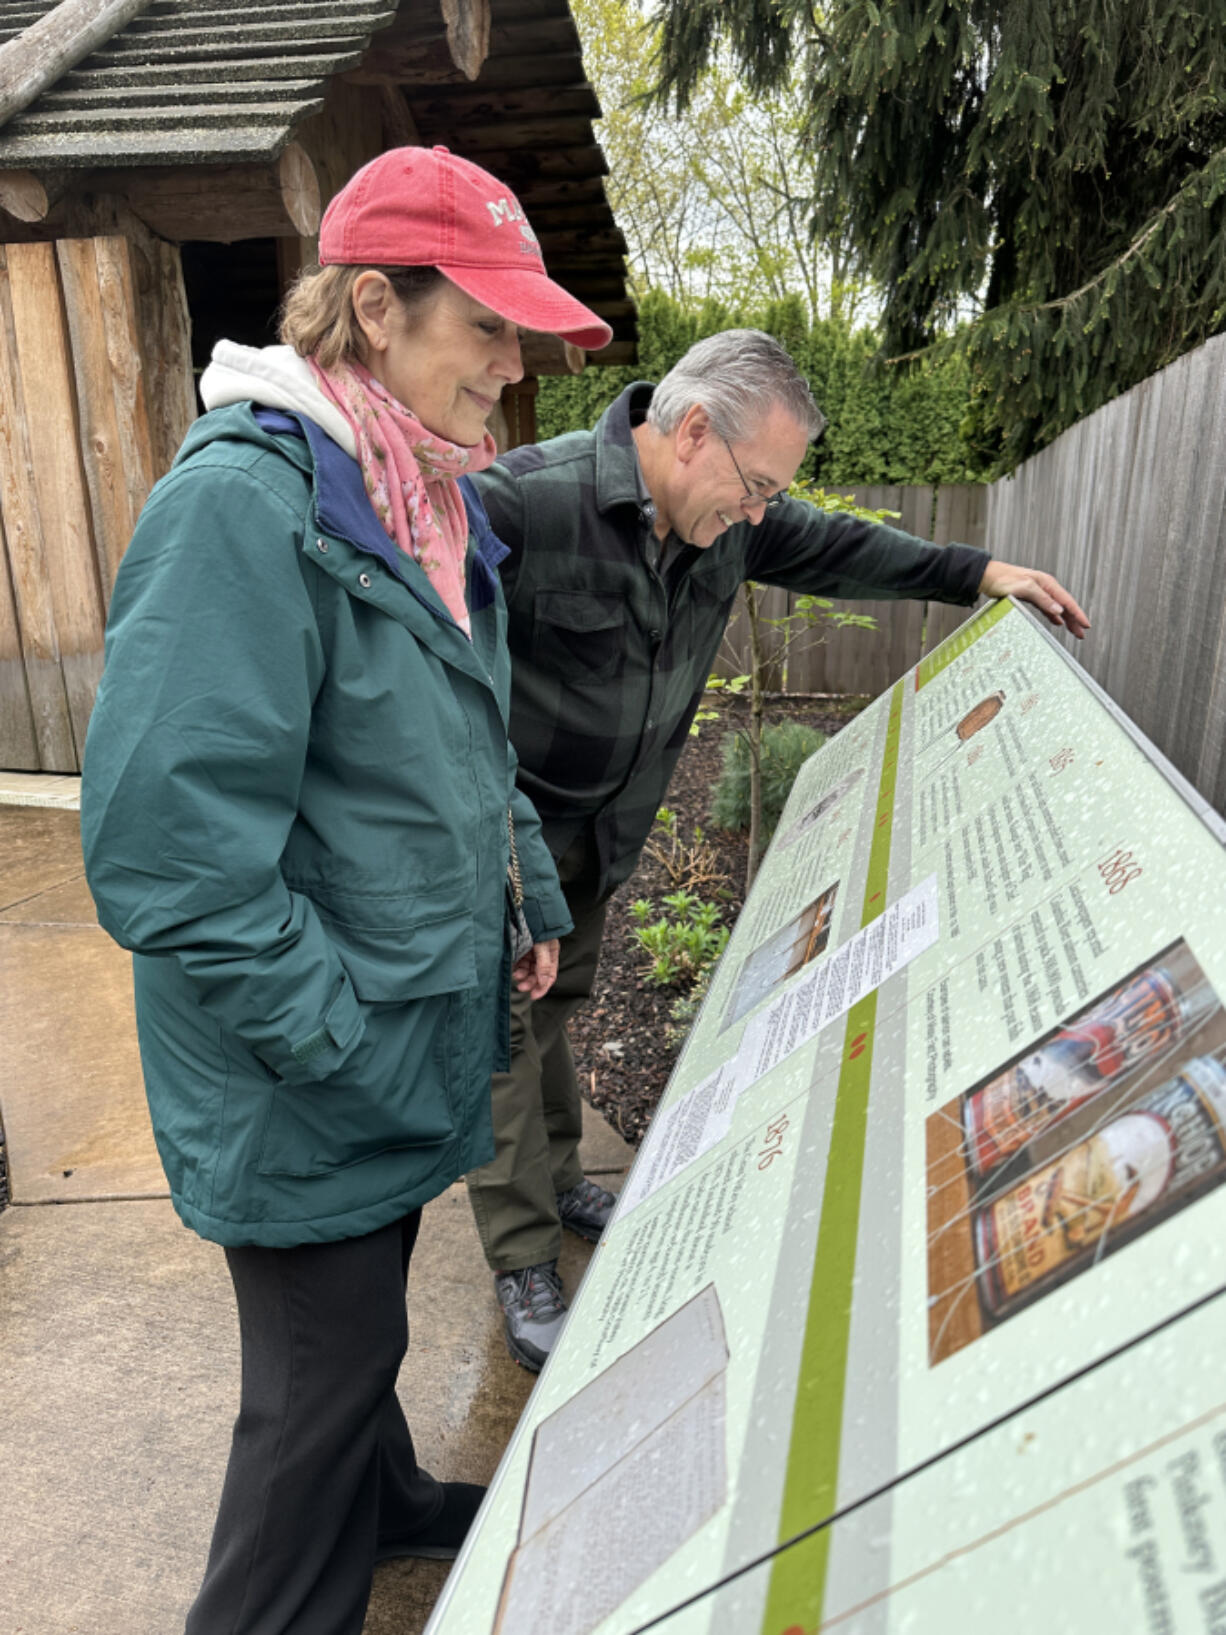 Two Rivers Heritage Museum and Clark County Historical Museum partnered to create an historical outdoor timeline exhibit that represents Camas and Washougal history.